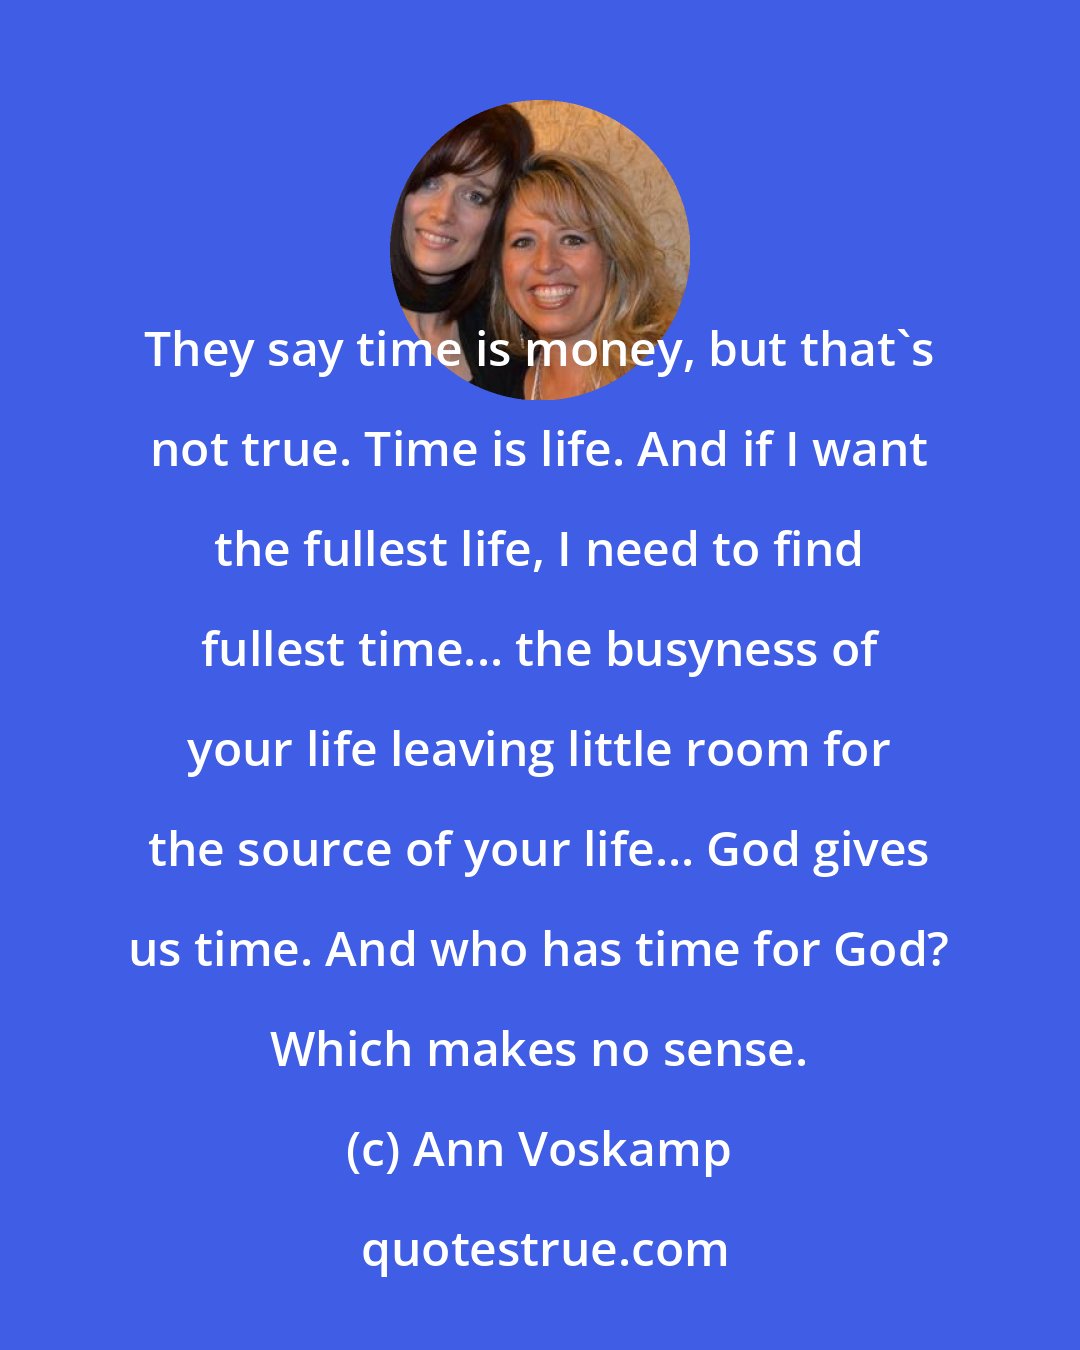 Ann Voskamp: They say time is money, but that's not true. Time is life. And if I want the fullest life, I need to find fullest time... the busyness of your life leaving little room for the source of your life... God gives us time. And who has time for God? Which makes no sense.